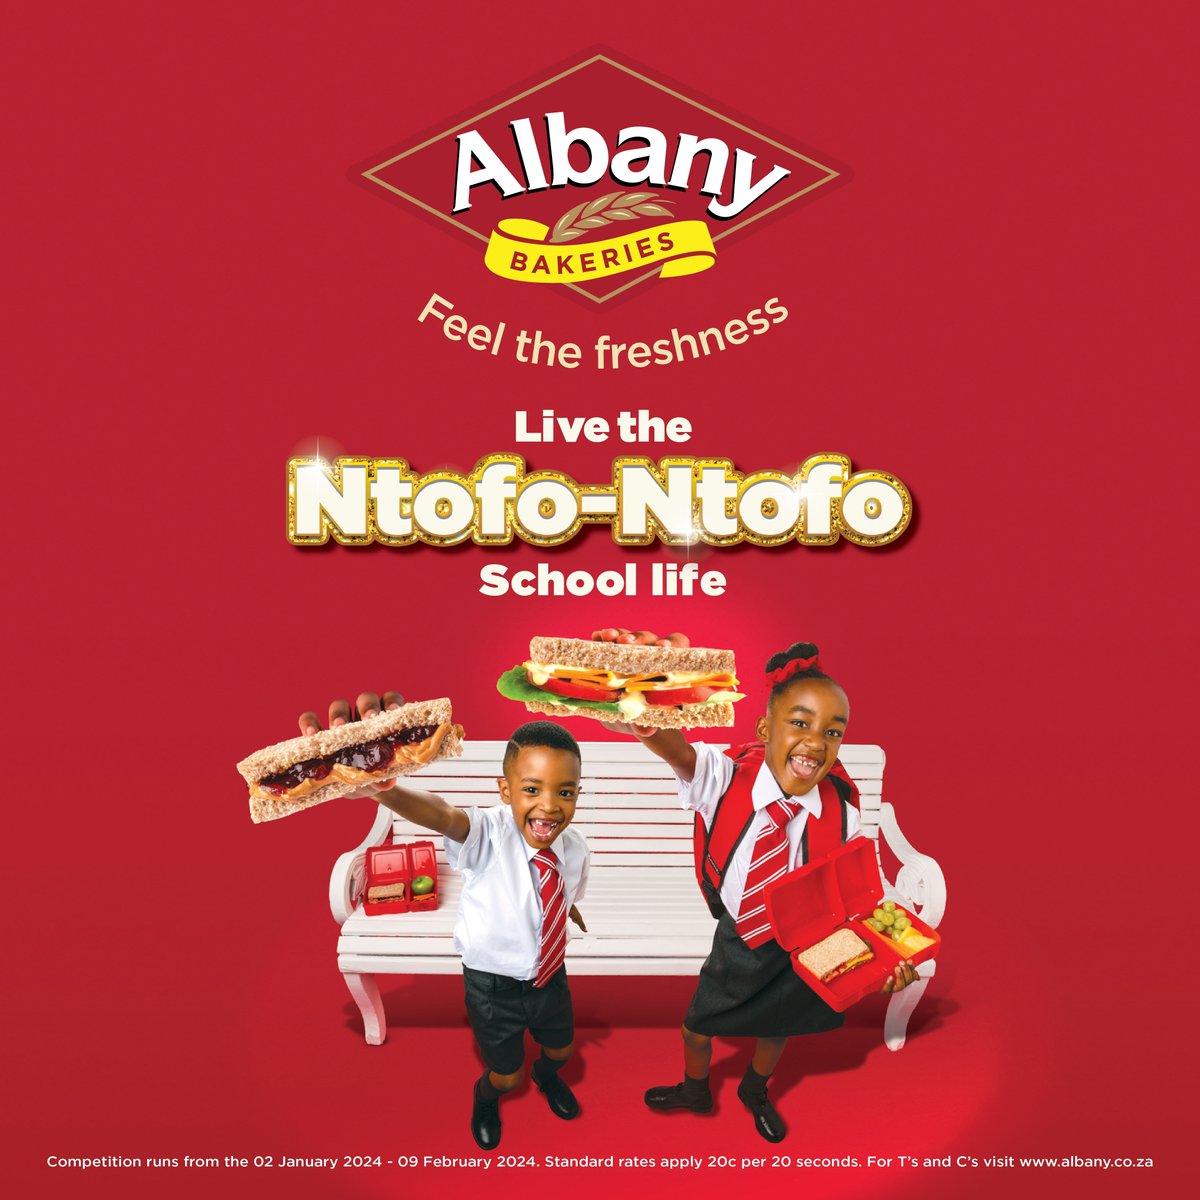 It's time to iron those shirts & polish those school shoes.

Stand a chance to WIN your share of R15,000 with Back To School with Albany.

🎒Post your best 'back to school' photo, tag 947 & @lovealbanybread.
Use #AlbanyLiveTheNtofoNtofoSchoolLife #FeelTheFreshness

Ts & Cs apply